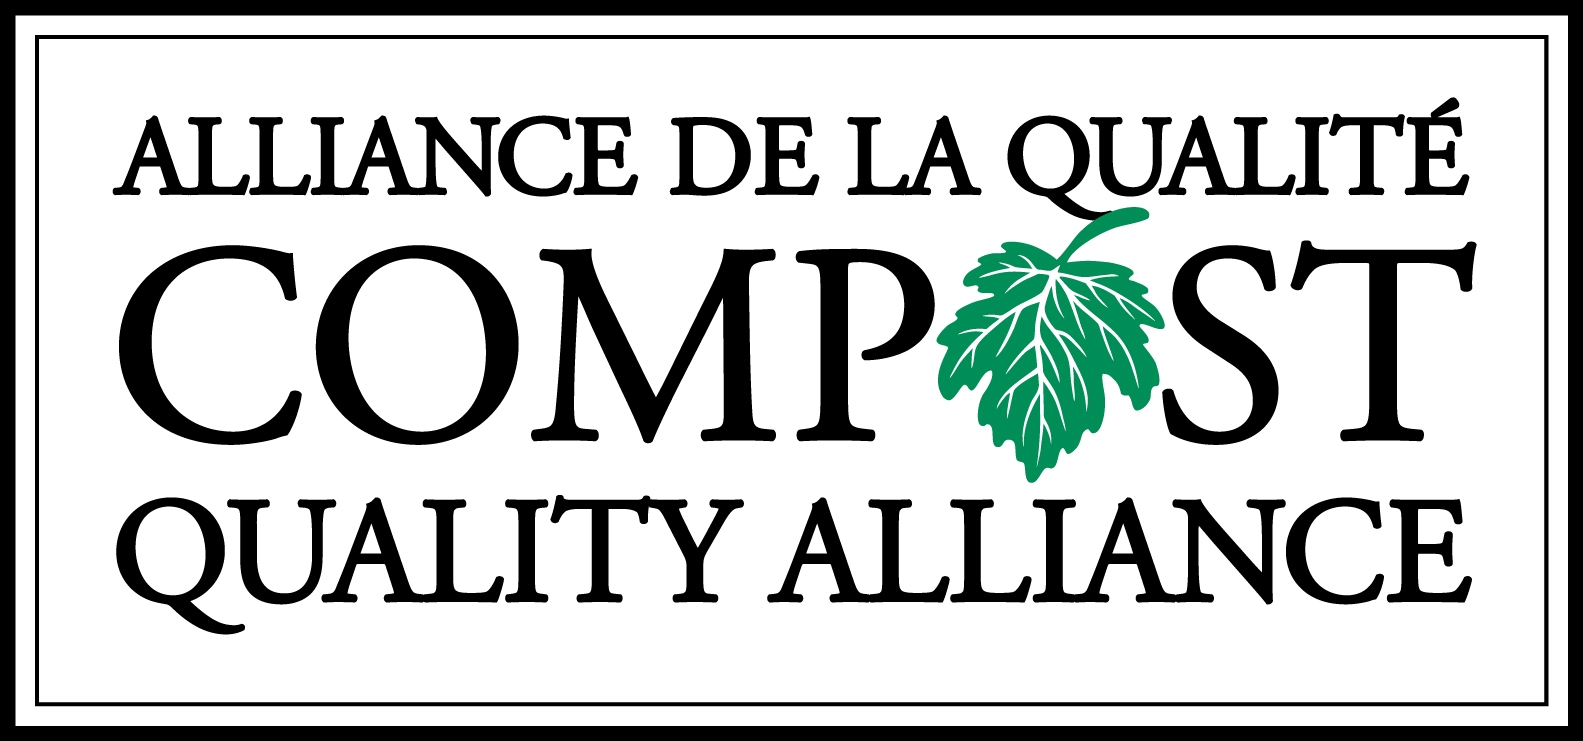 Compost Quality Alliance